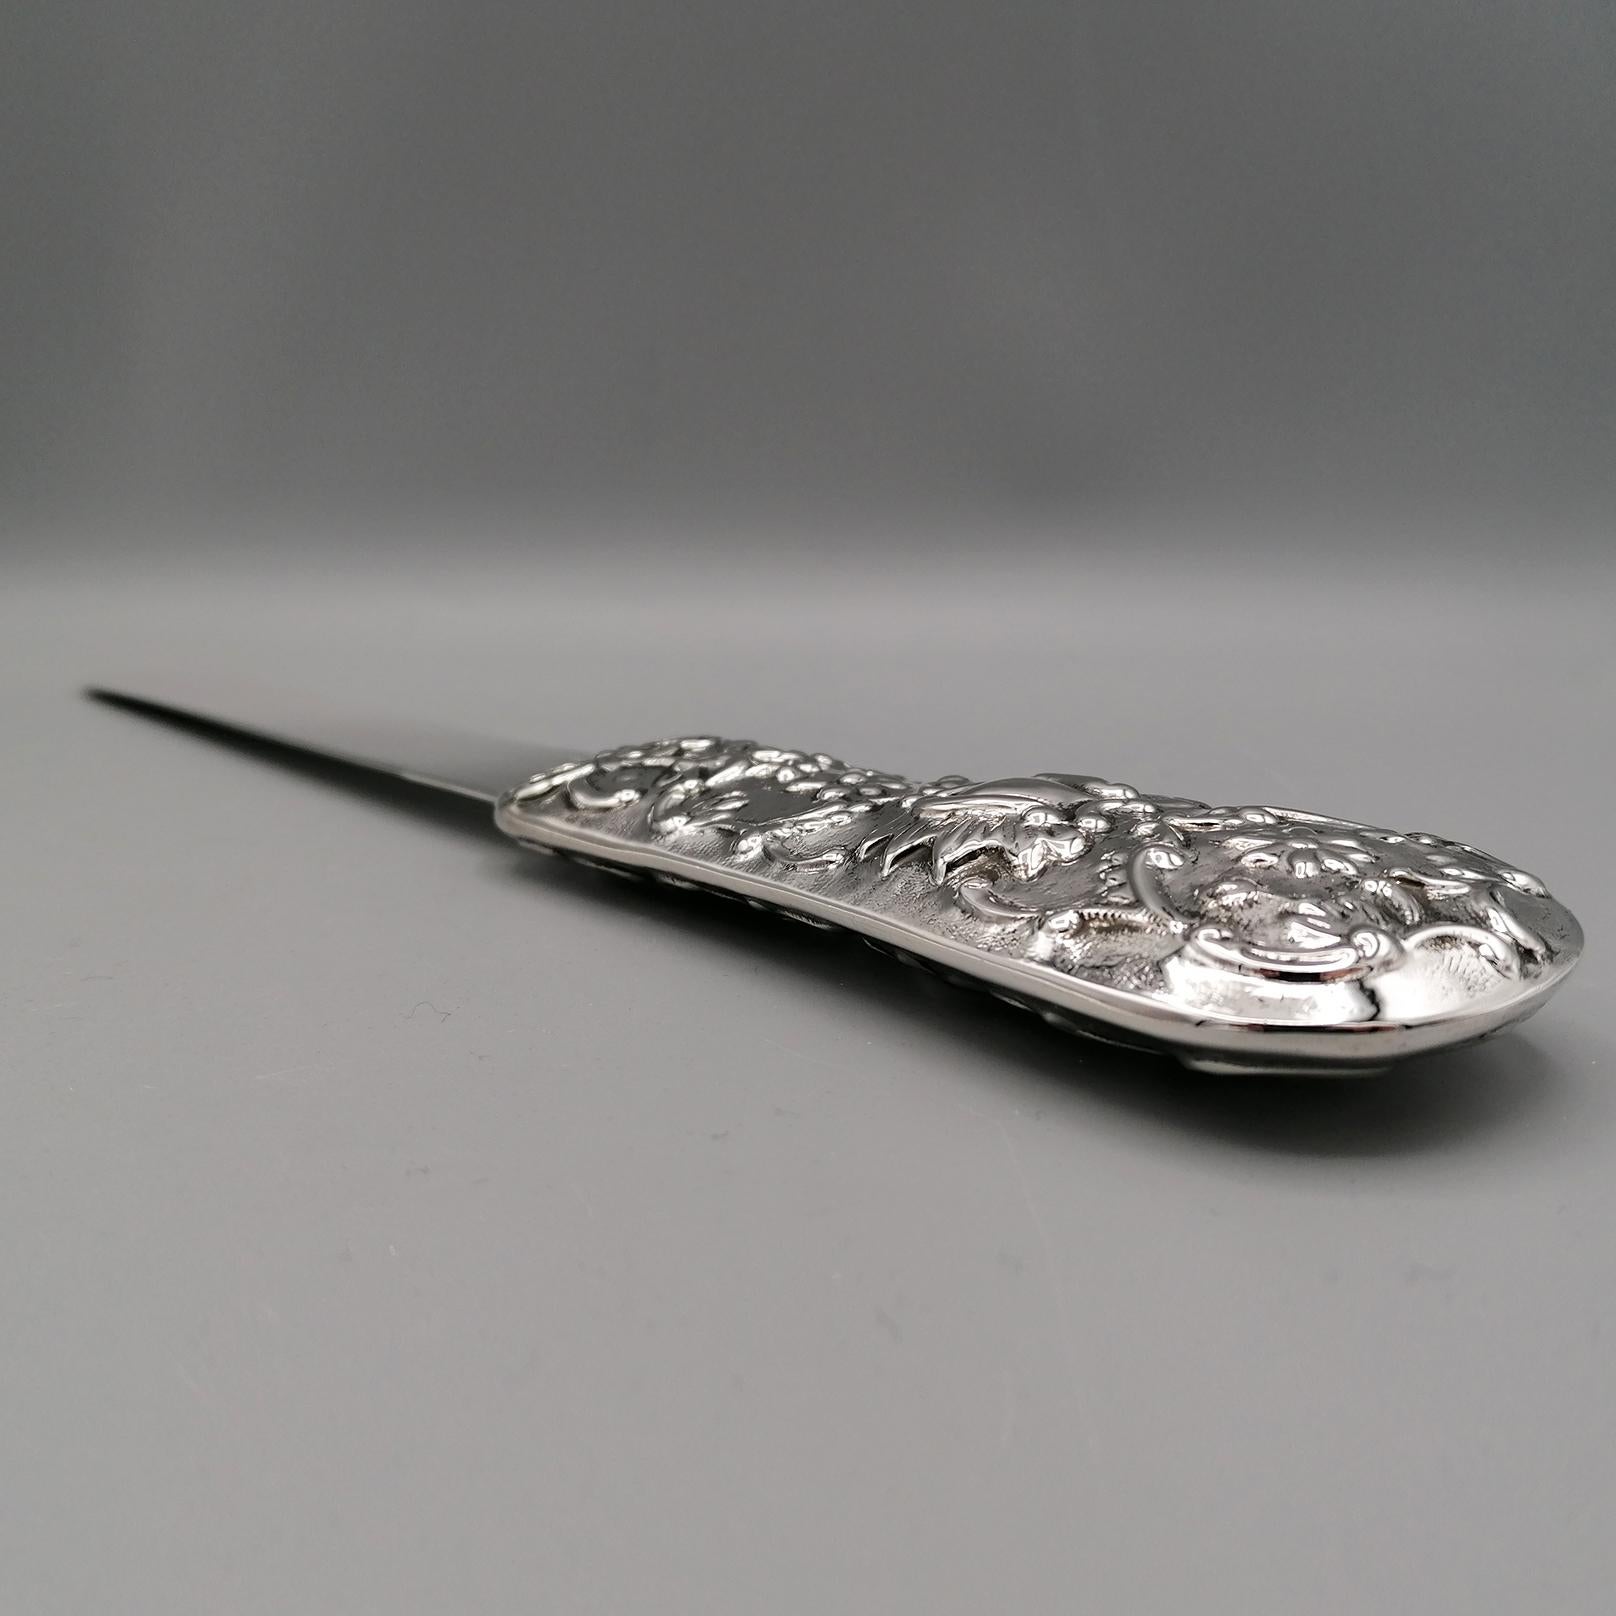 20th Cebtury Italian Big Sterling Silver Letter Opener In Excellent Condition For Sale In VALENZA, IT